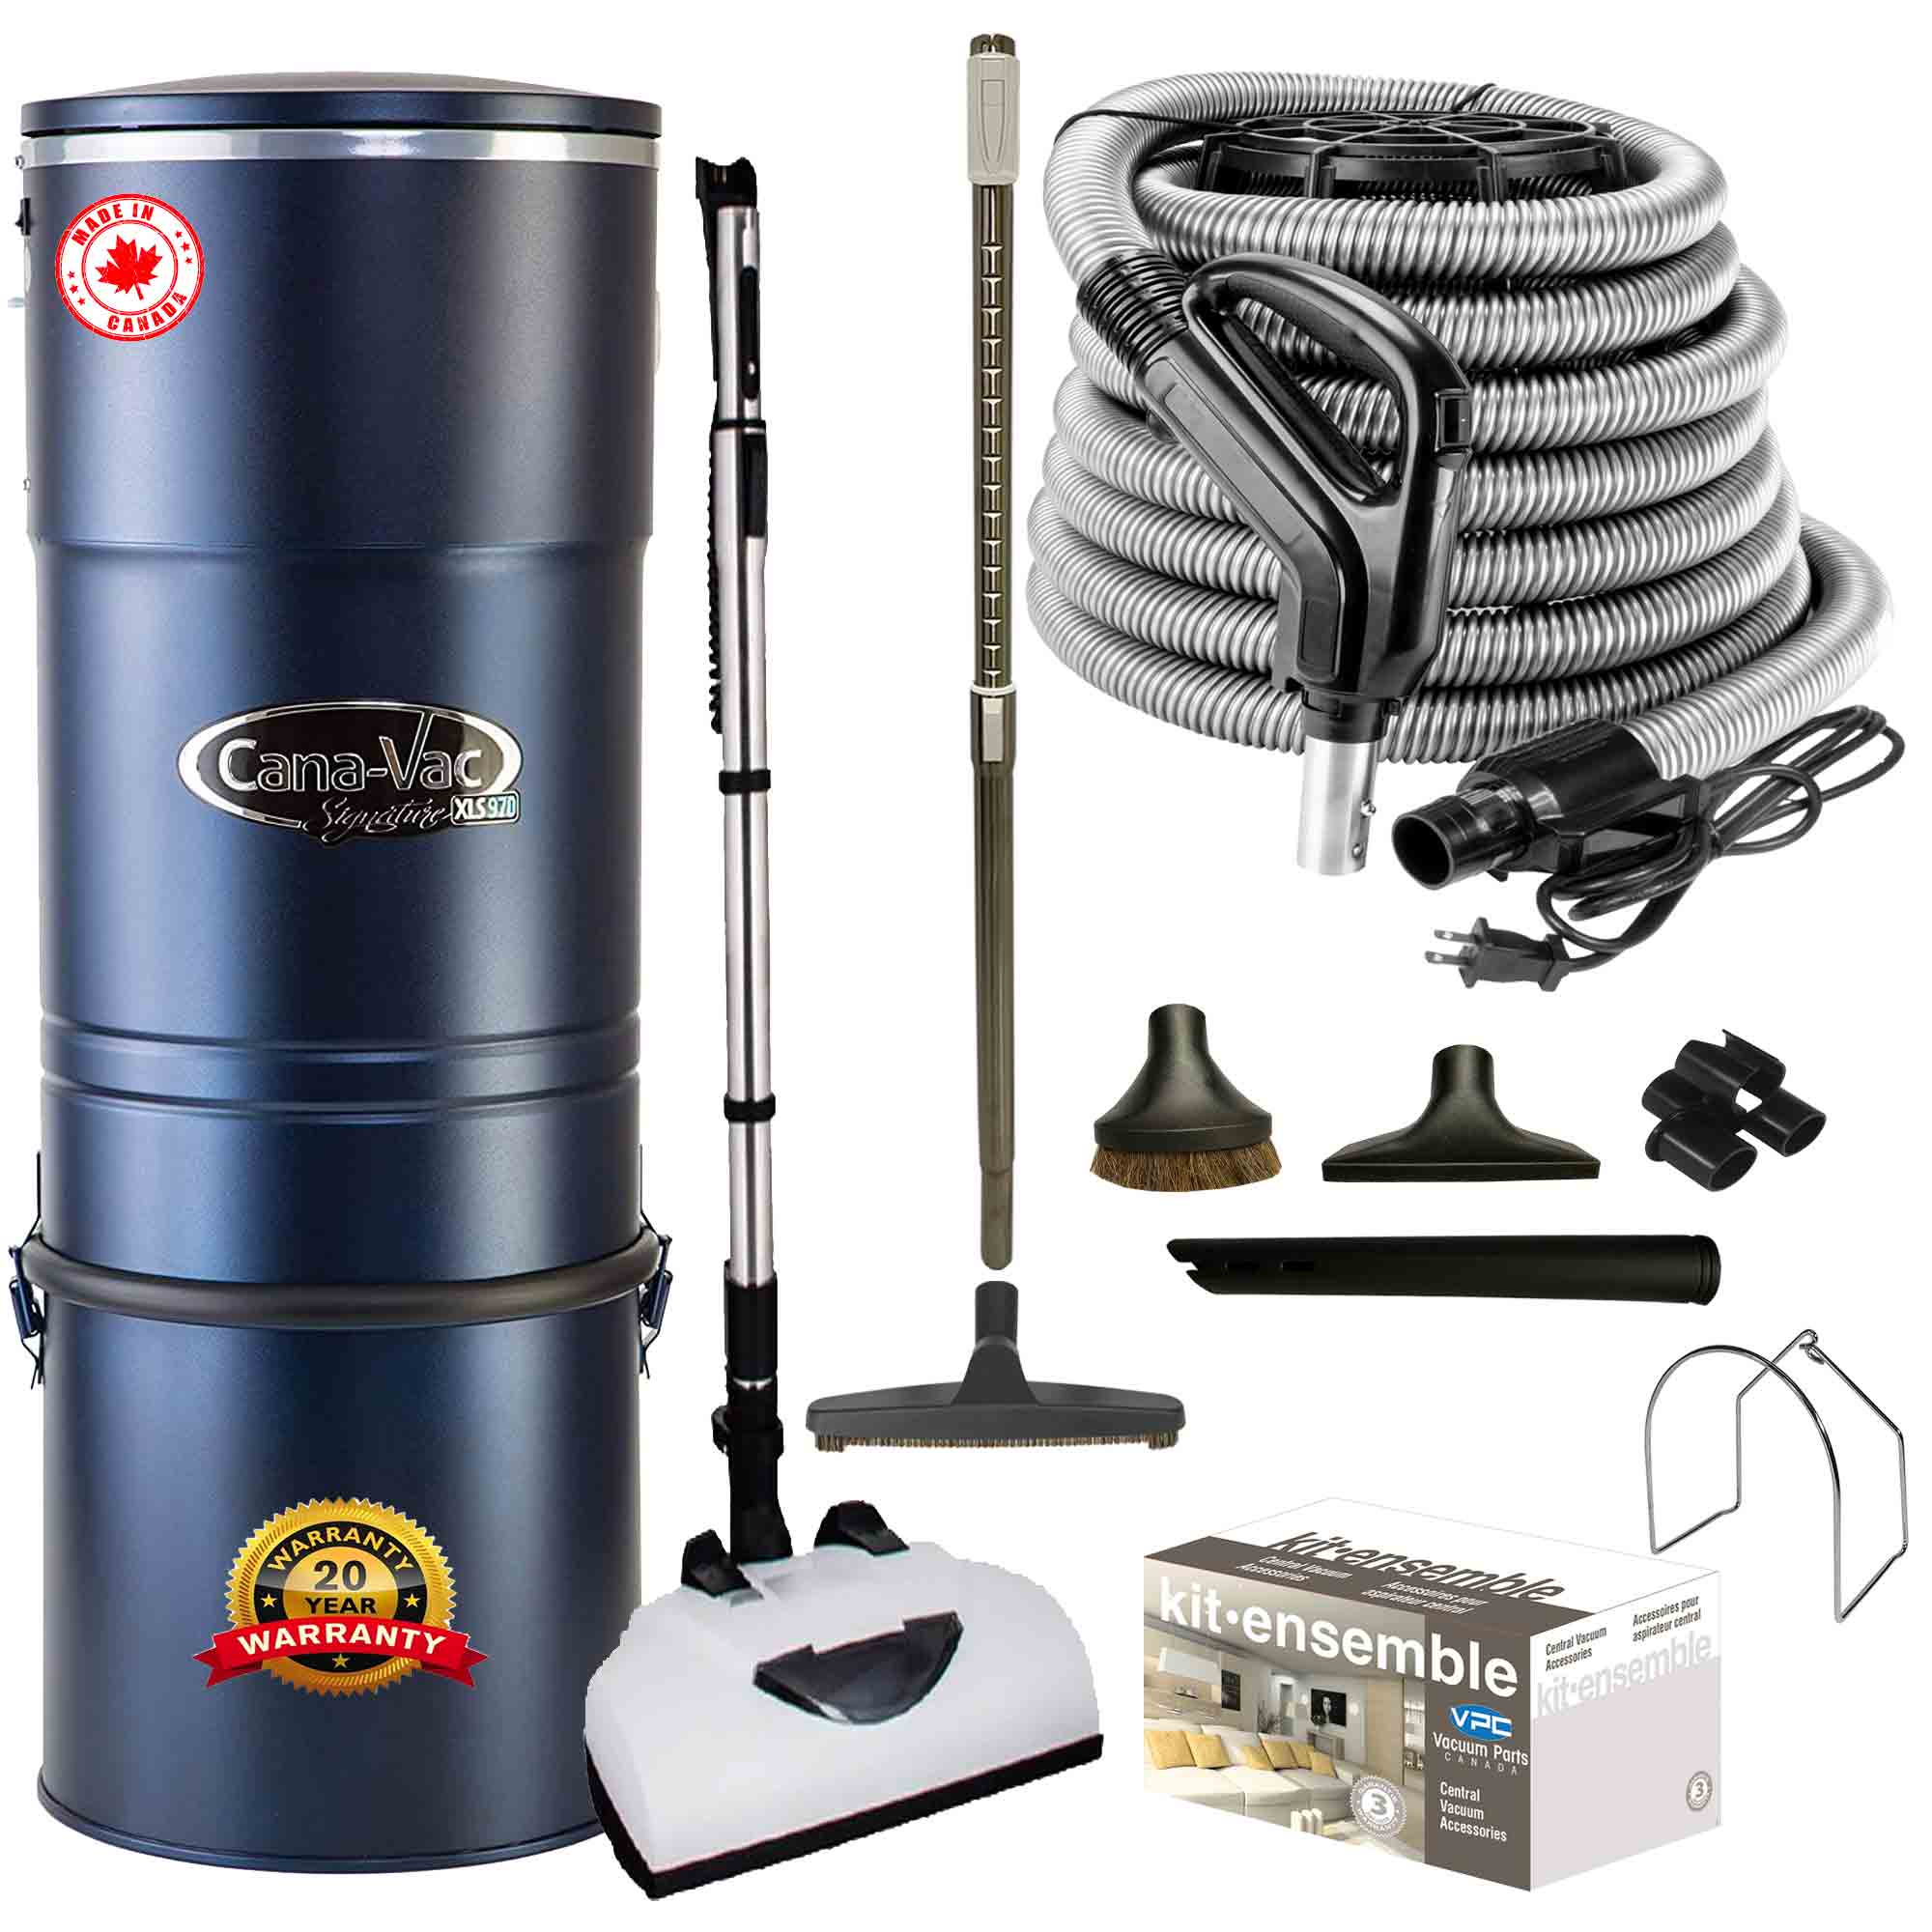 Cana-Vac XLS990 Central Vacuum with Deluxe Electric Package (Black)